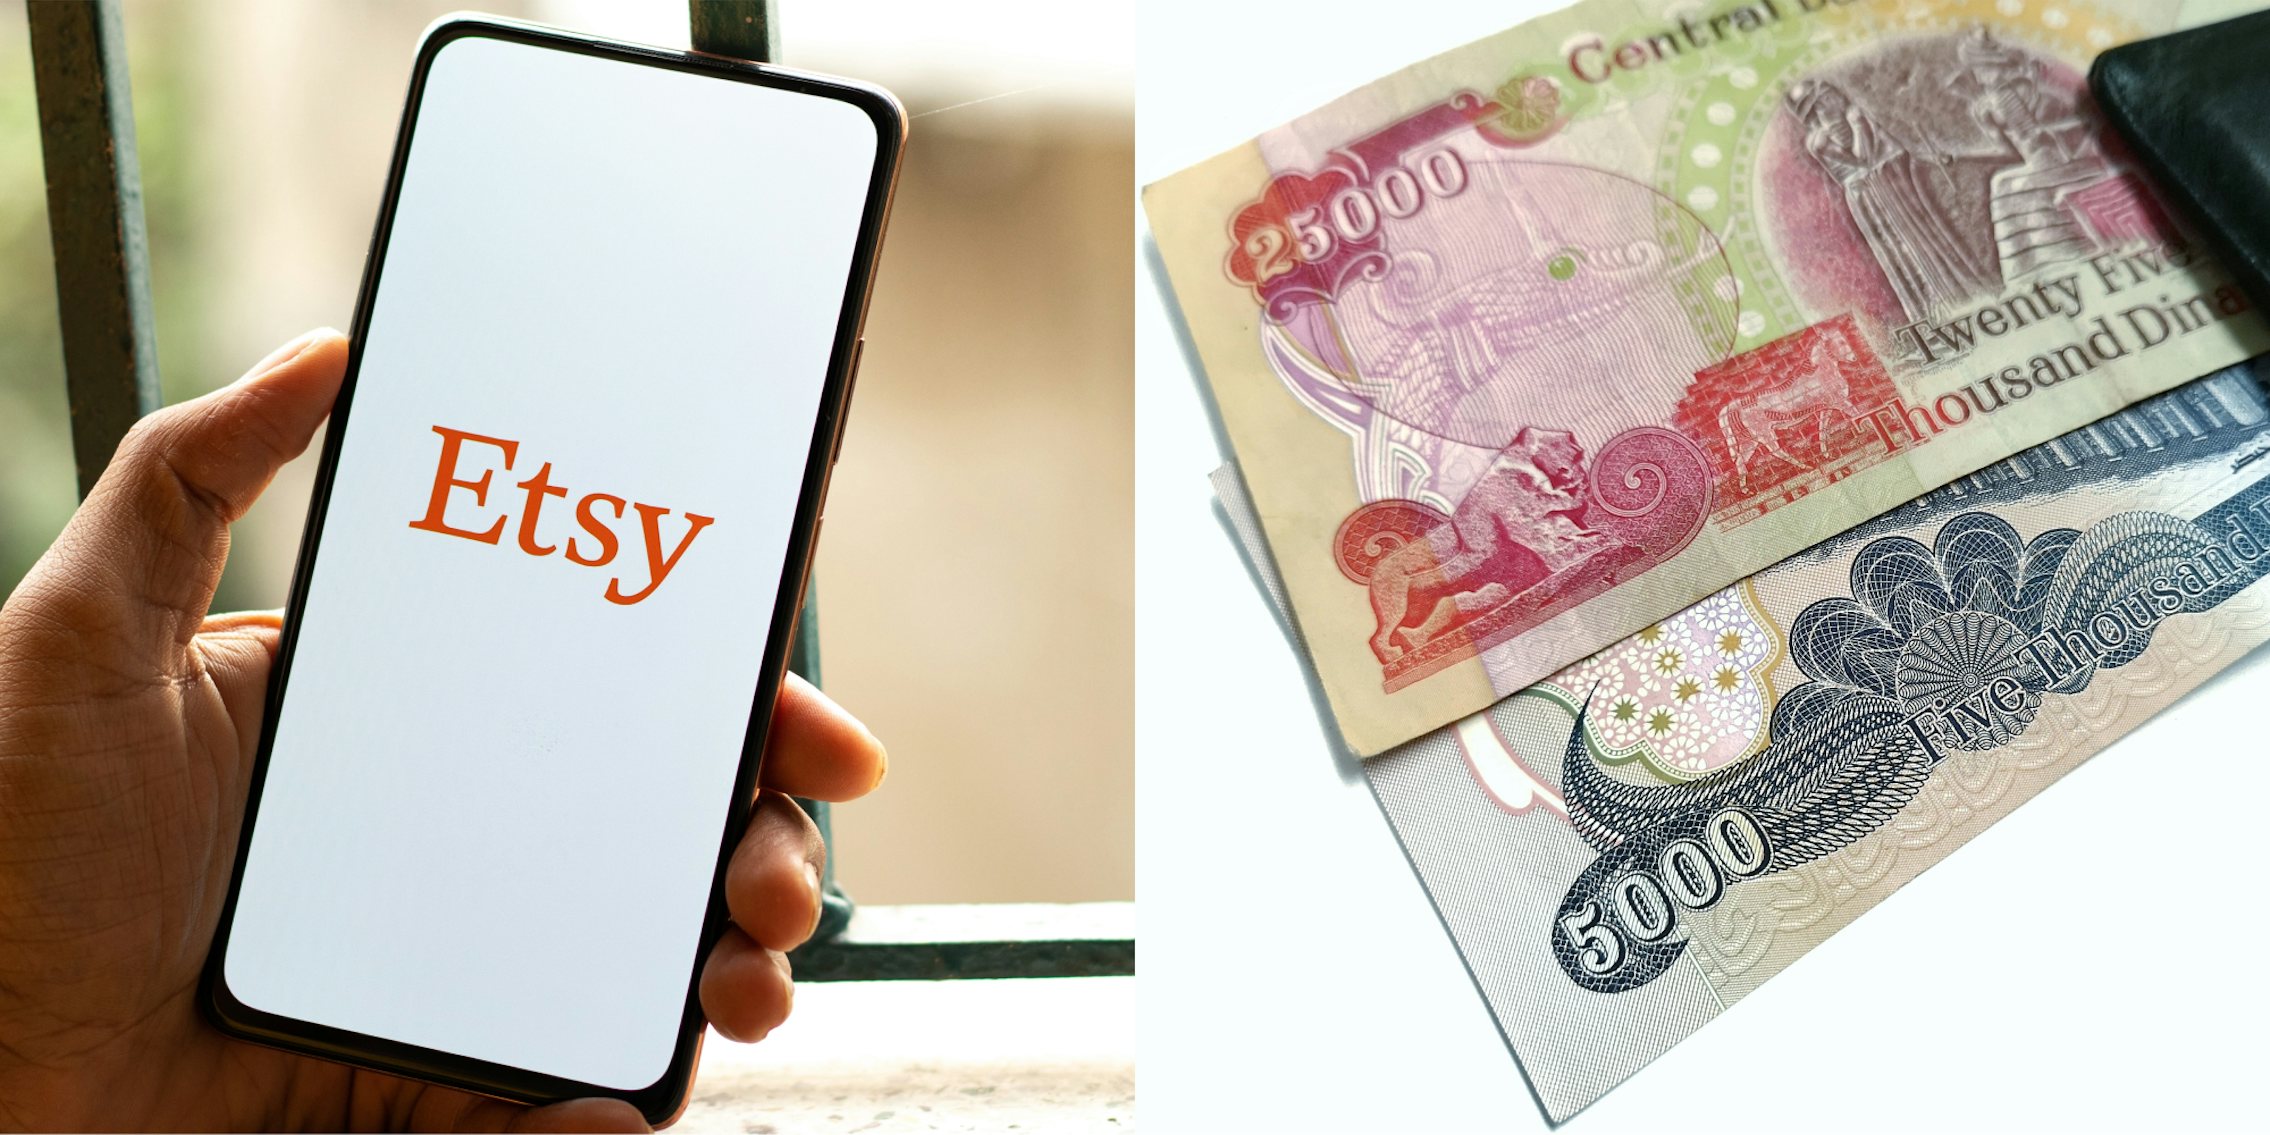 Etsy app opening on phone in hand in front of window (l) Iraqi 25000/5000 dinars banknote with black wallet over white background (r)